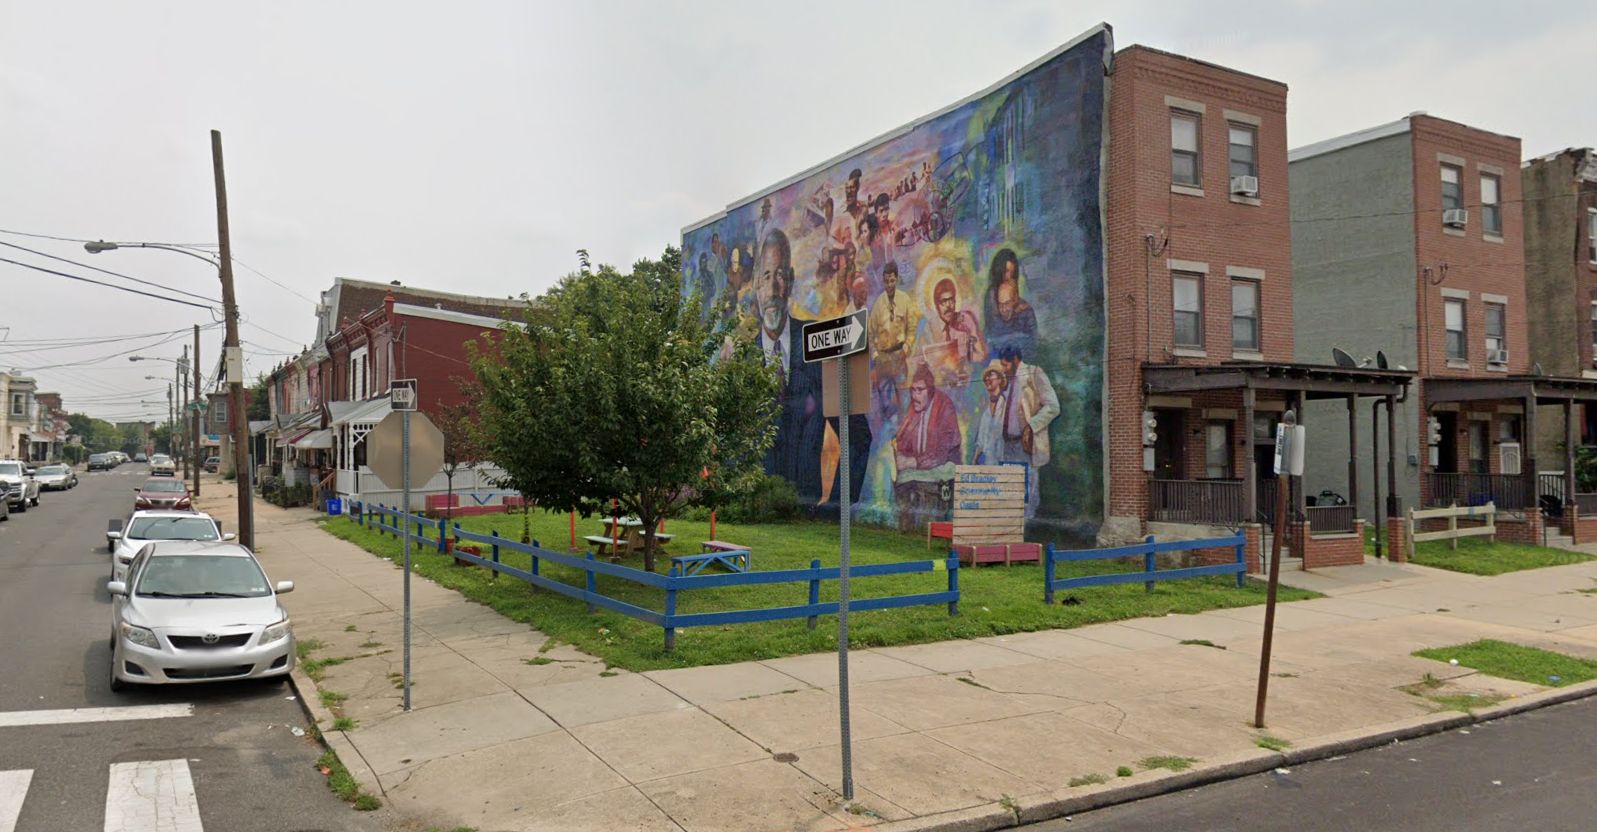 953 Belmont Avenue, with the adjacent mural. Looking southeast. July 2021. Credit: Google Street View